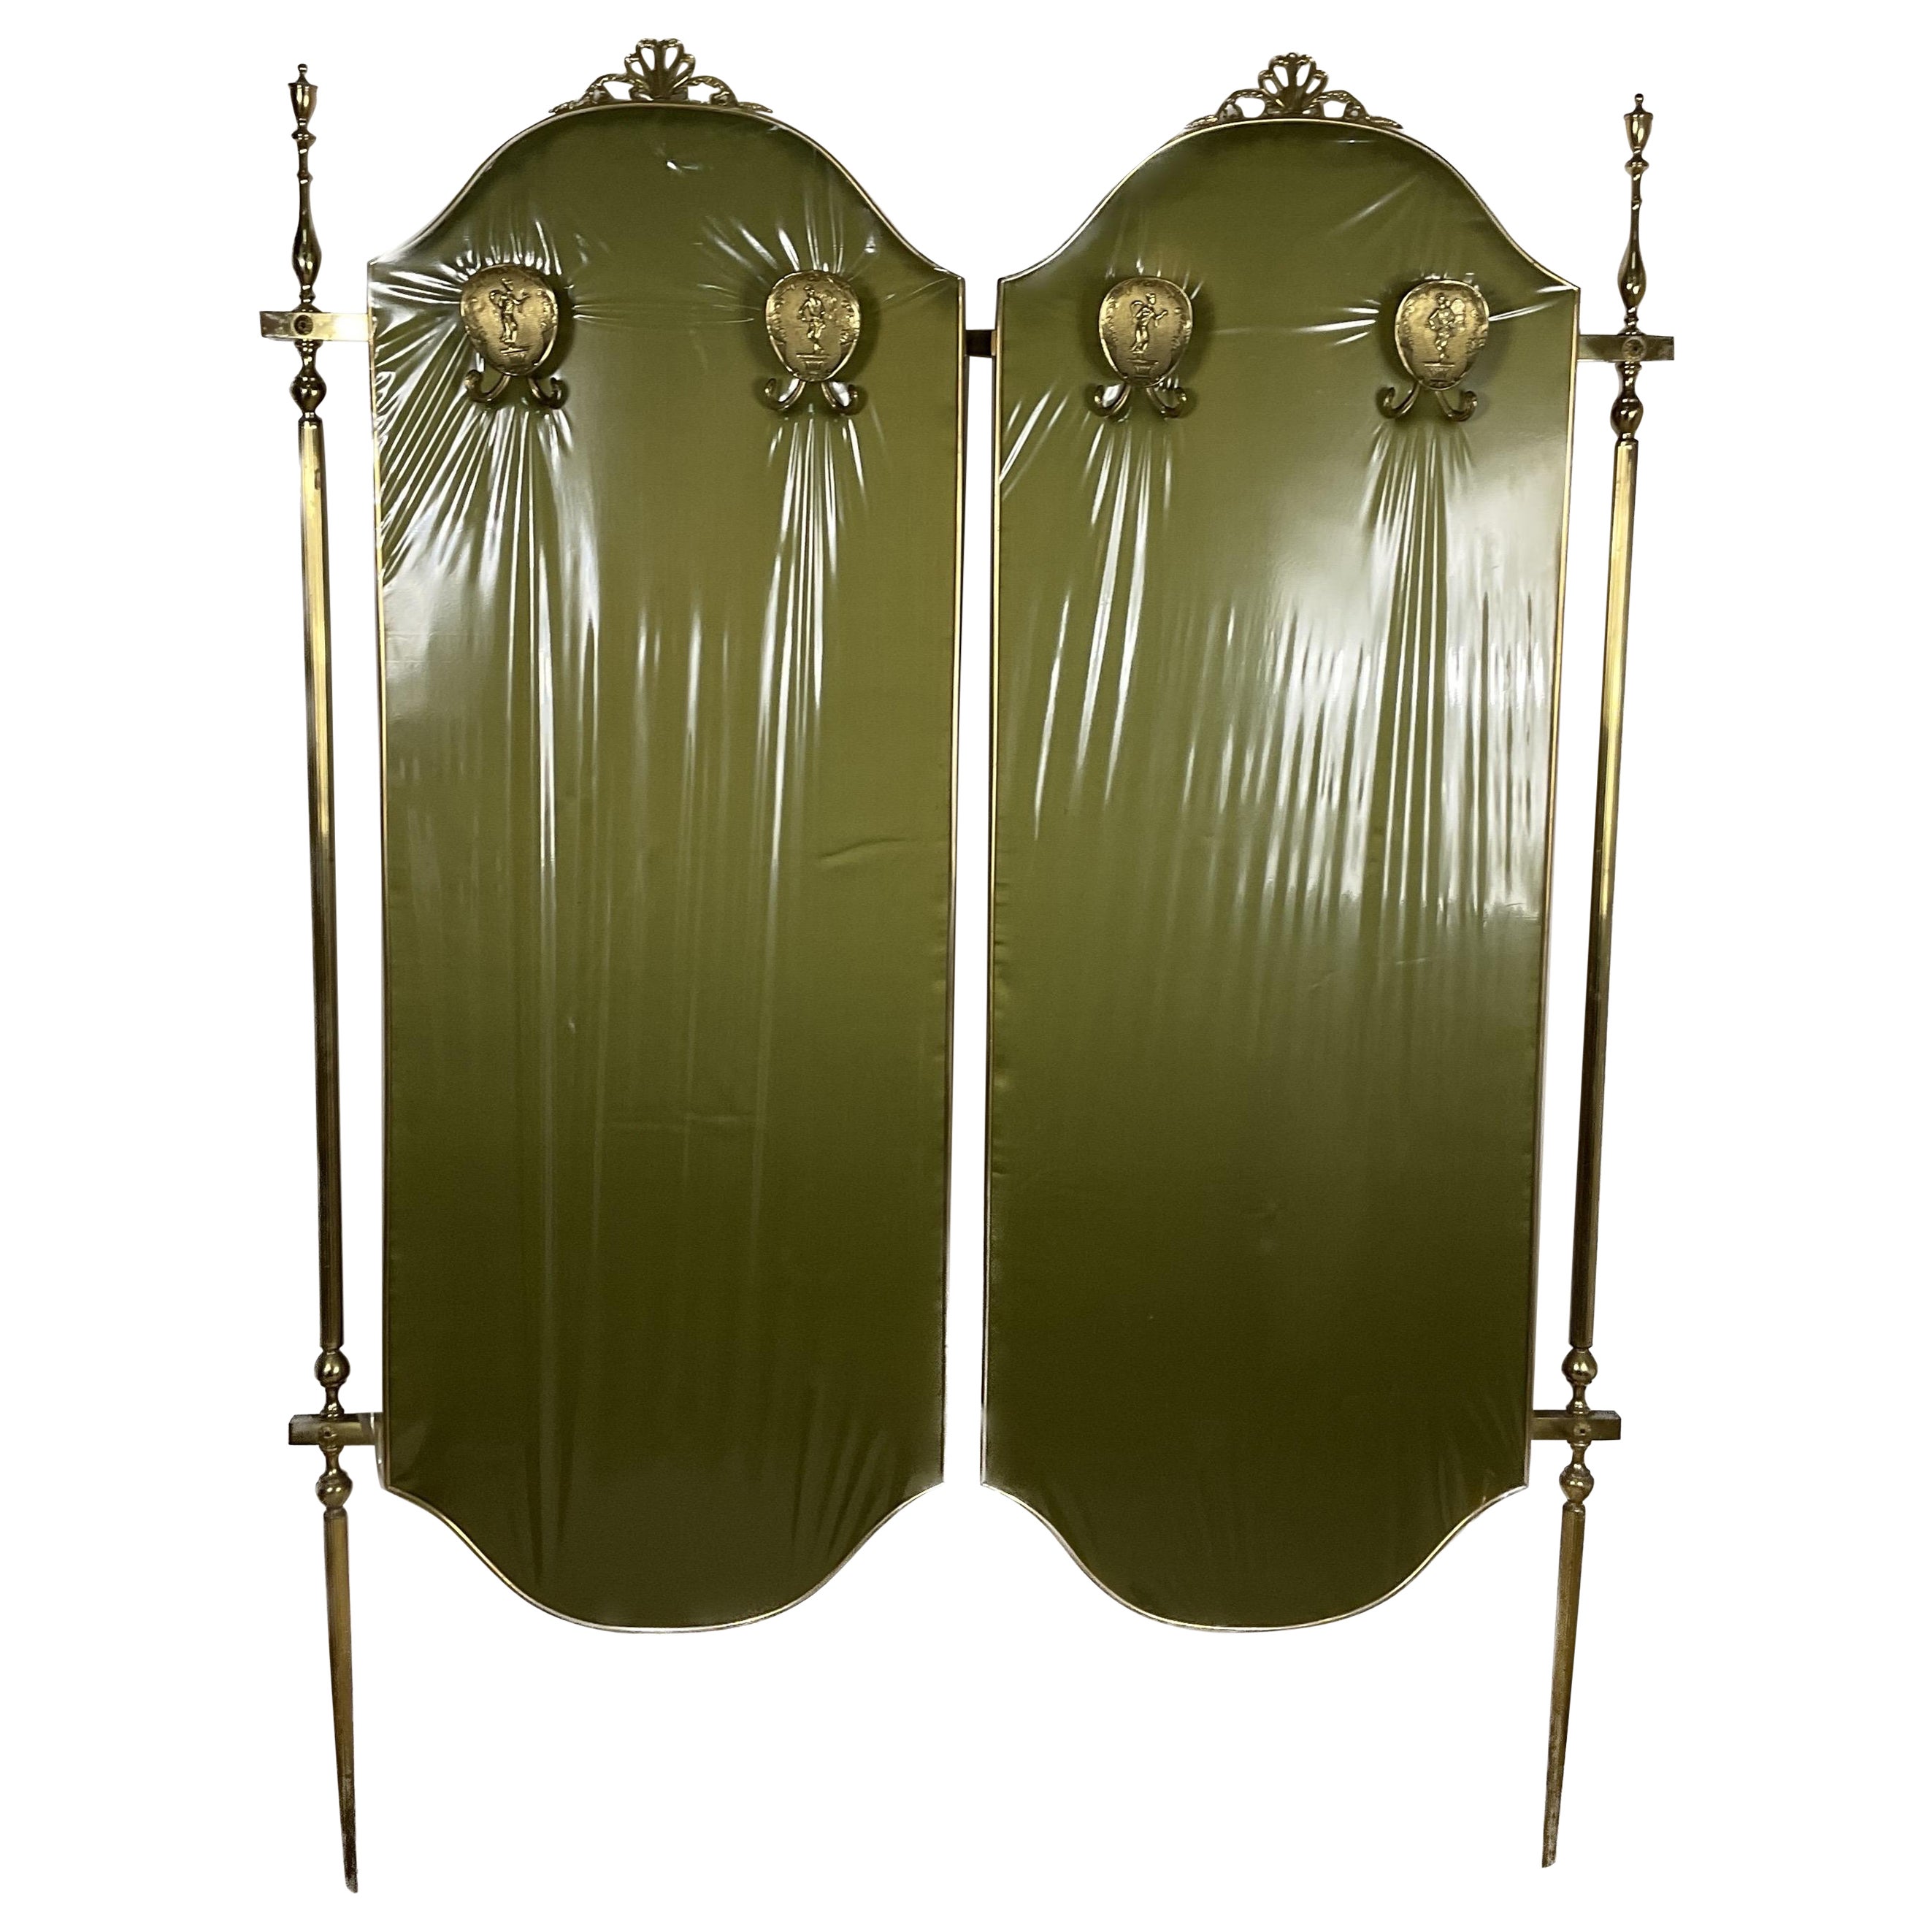 Clothes rack with brass structure, covered with wood at the back and with green